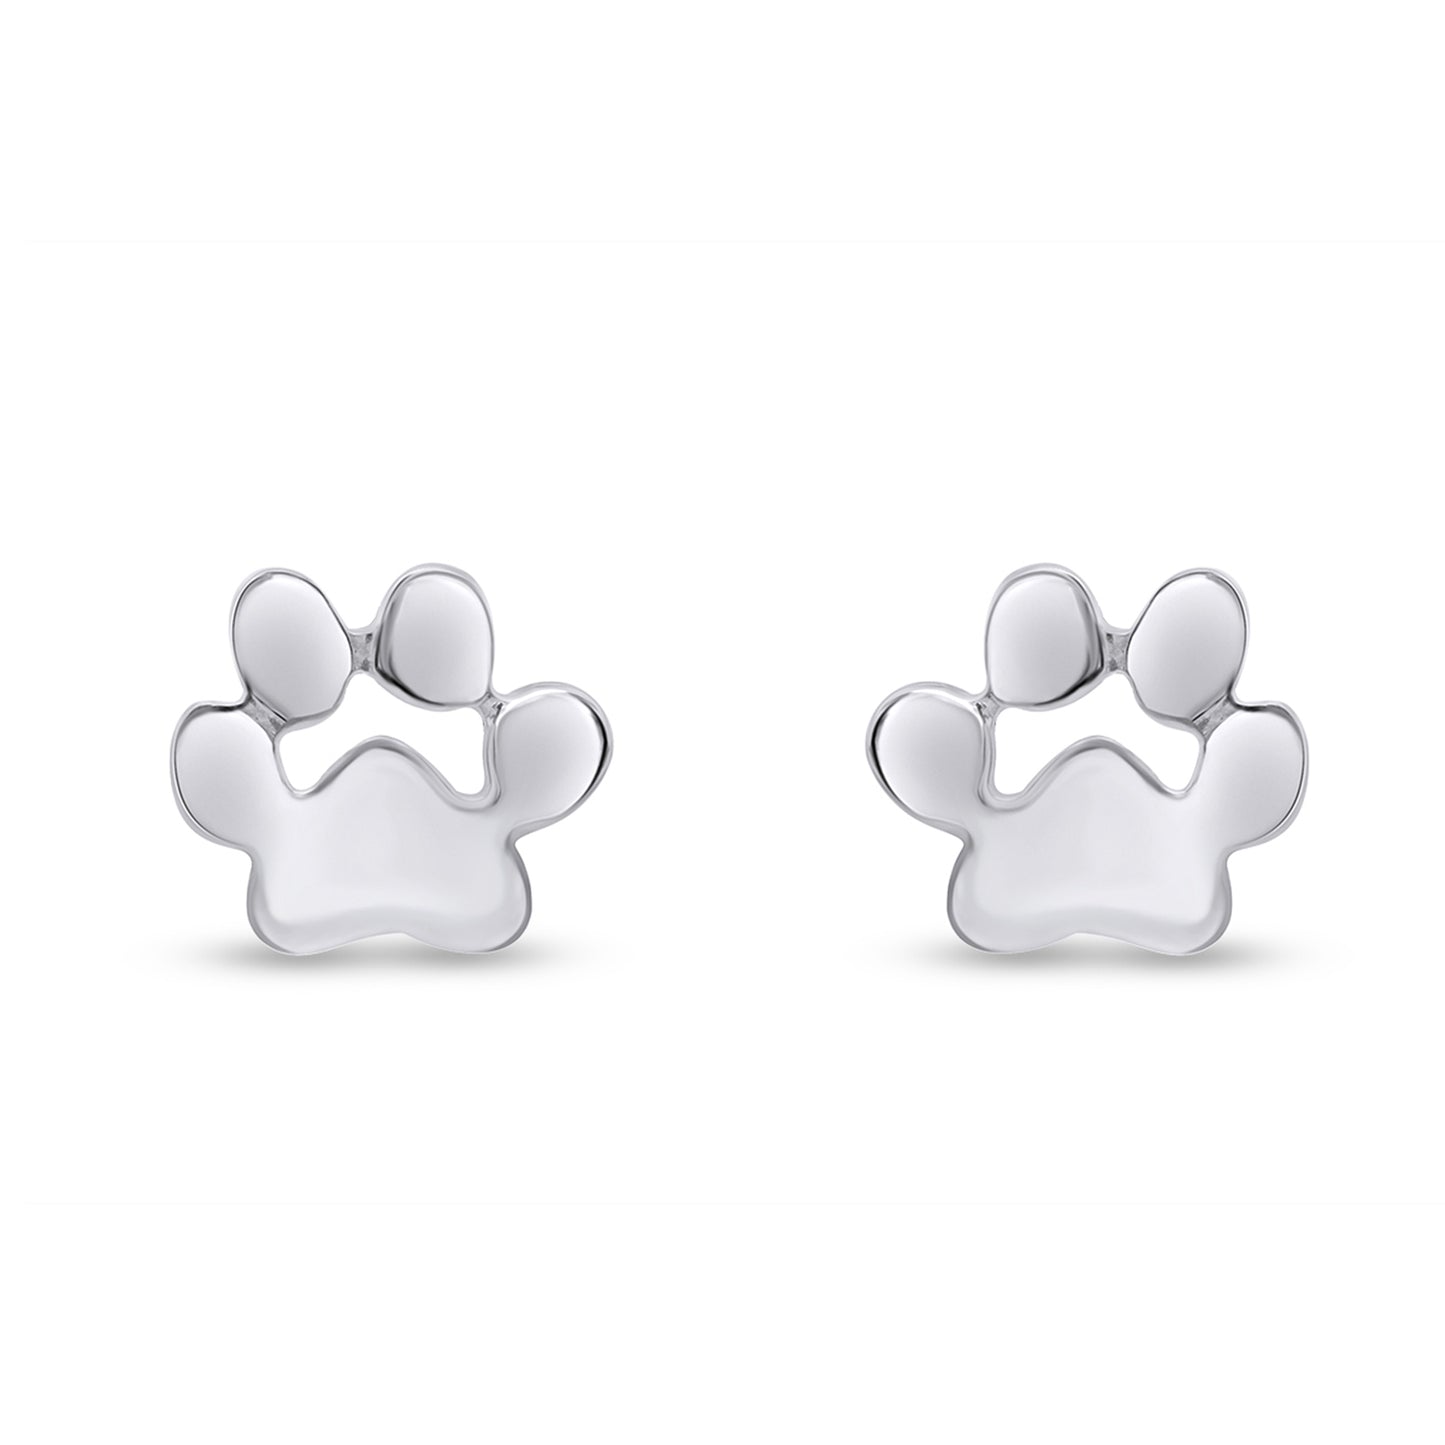 Cute Dog Paw Print Stud Earrings for Women in 925 Sterling Silver with Push Back